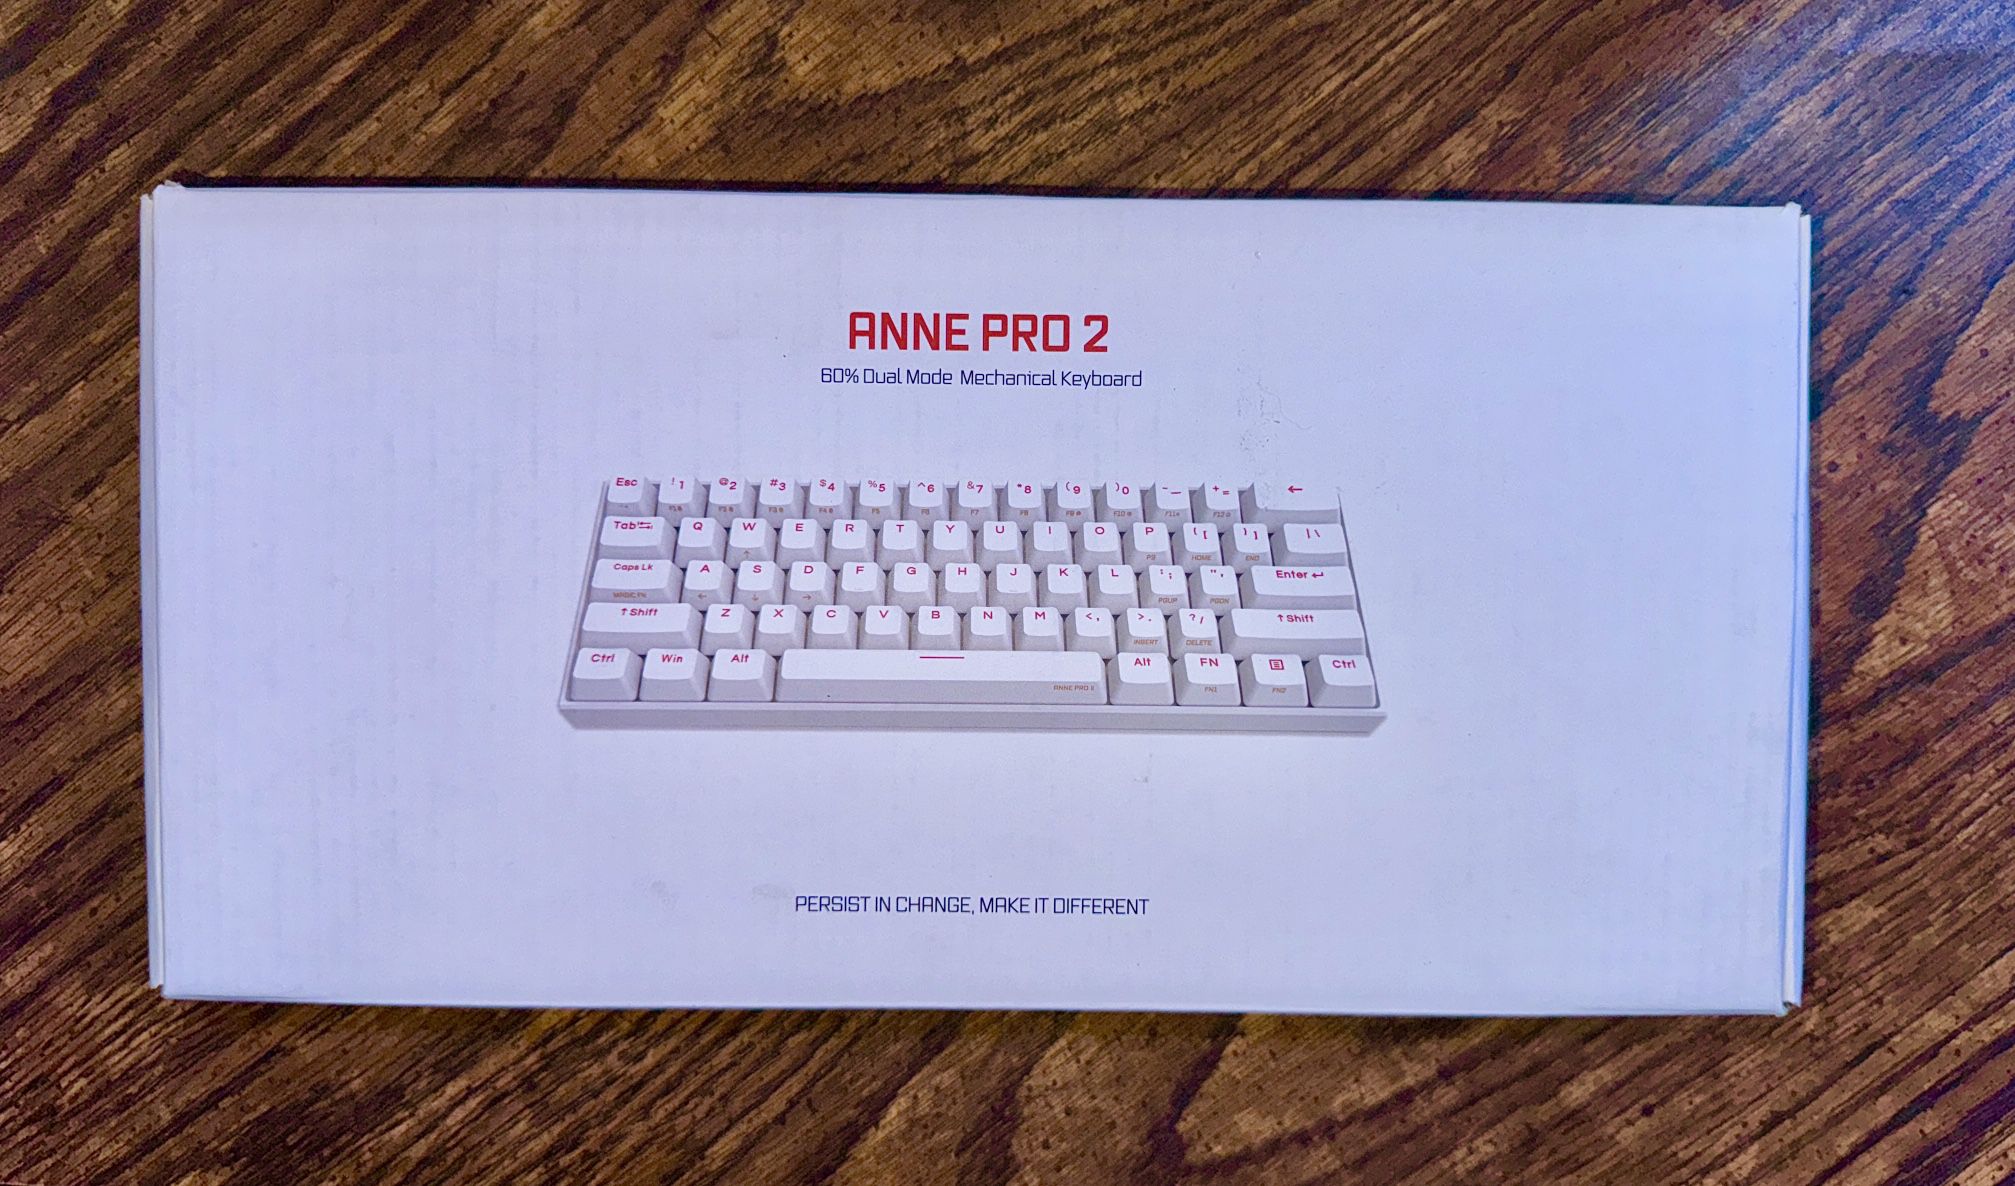 Anne Pro 2 60% Mechanical Keyboard - Cherry MX Blue Switches